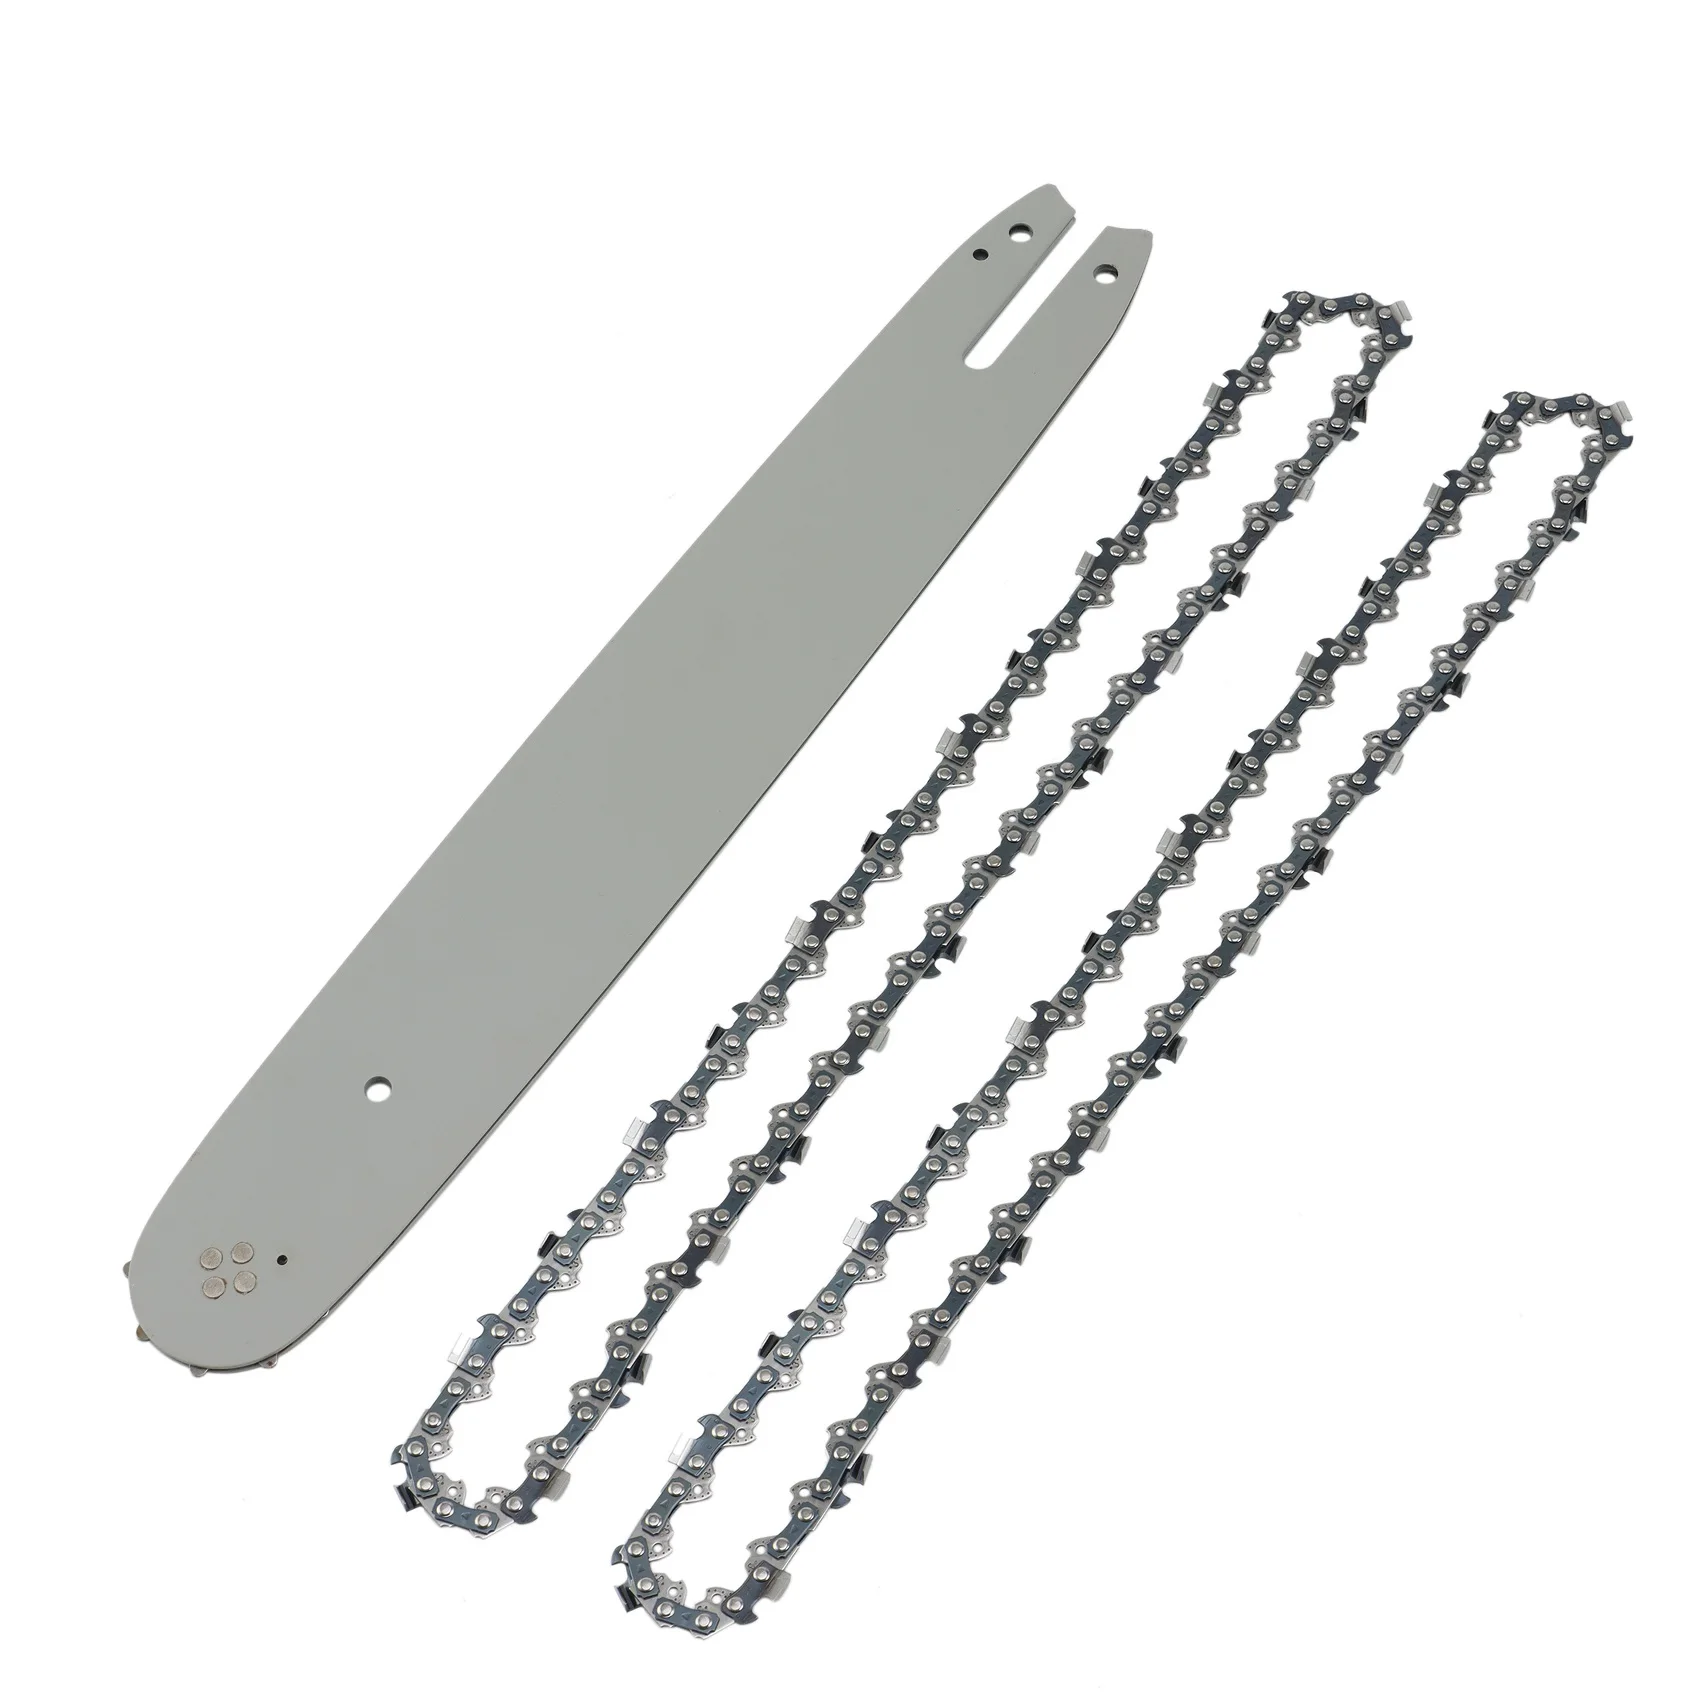 

14 Inch Chain Saw Guide Bar with 2Pcs Chains for STIHL 017 MS170 MS171 MS170/MS180/MS230/MS250 All Types Steel